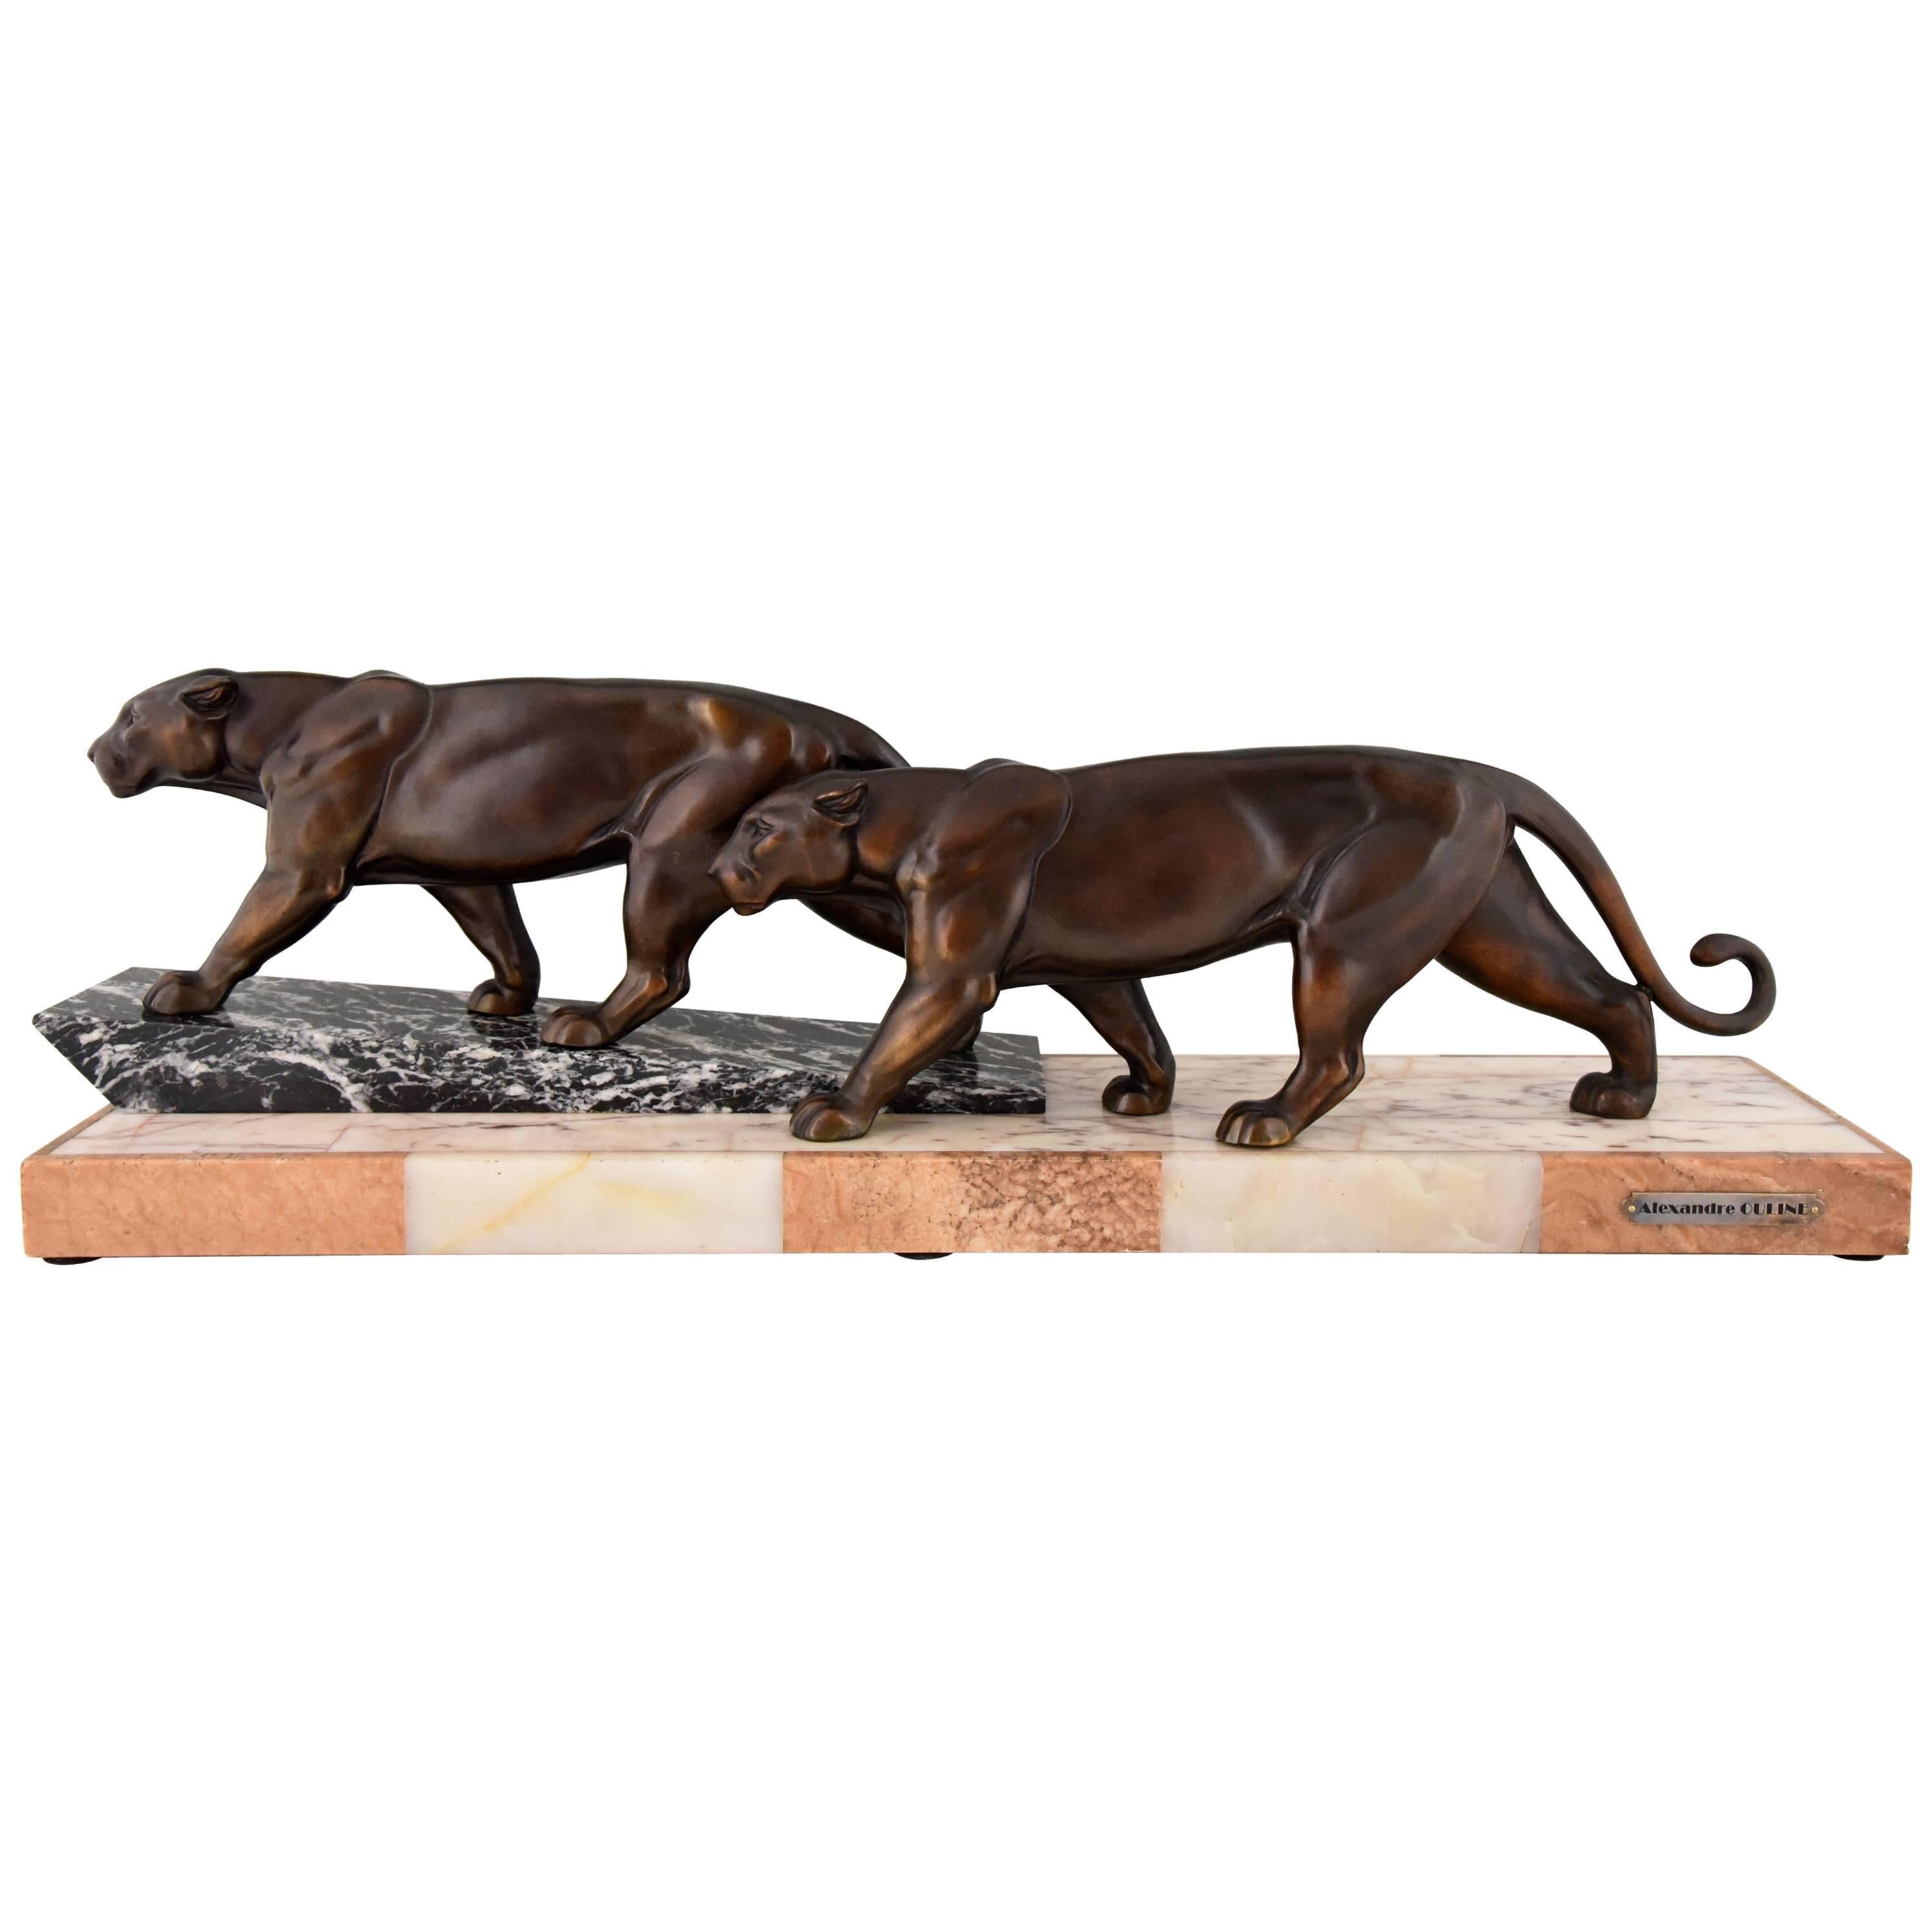 Art Deco Sculpture of Two Walking Panthers by Alexandre Ouline, 1930 France